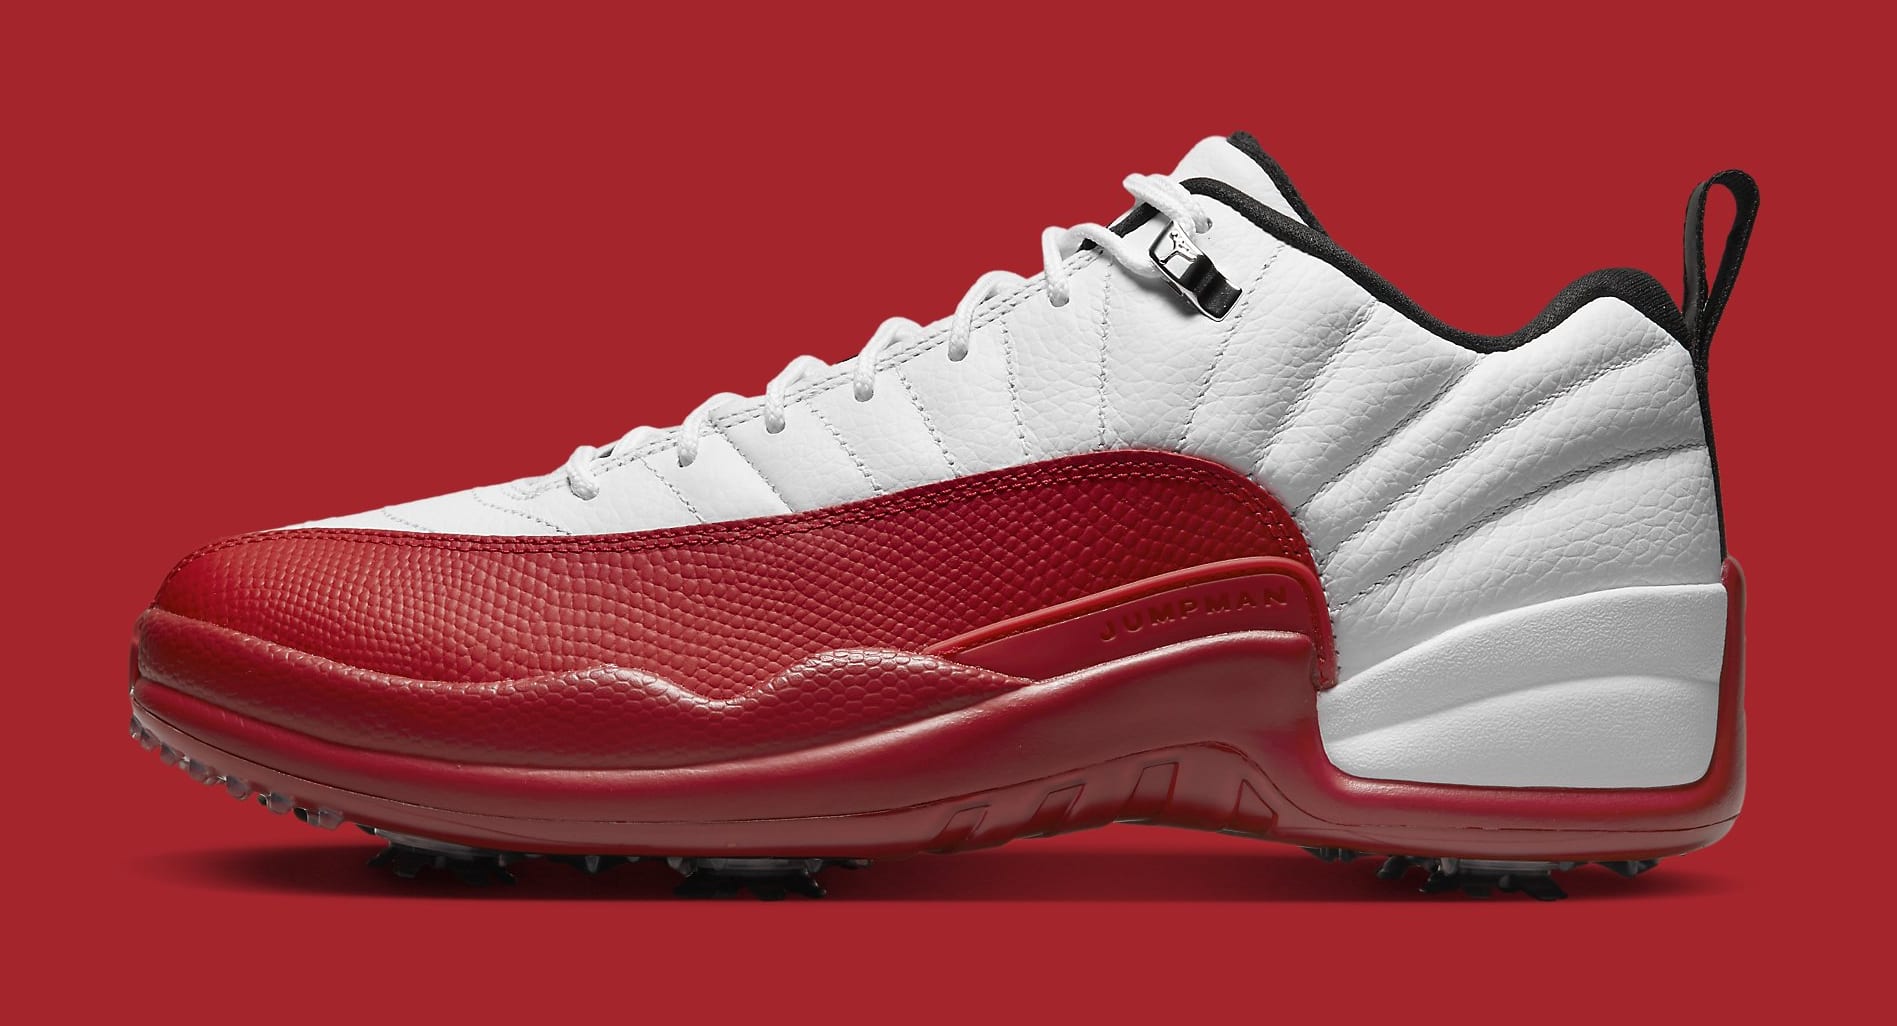 Air Jordan 12 Low Golf 'Cherry' Release Date Dh4120 161 | Sole Collector